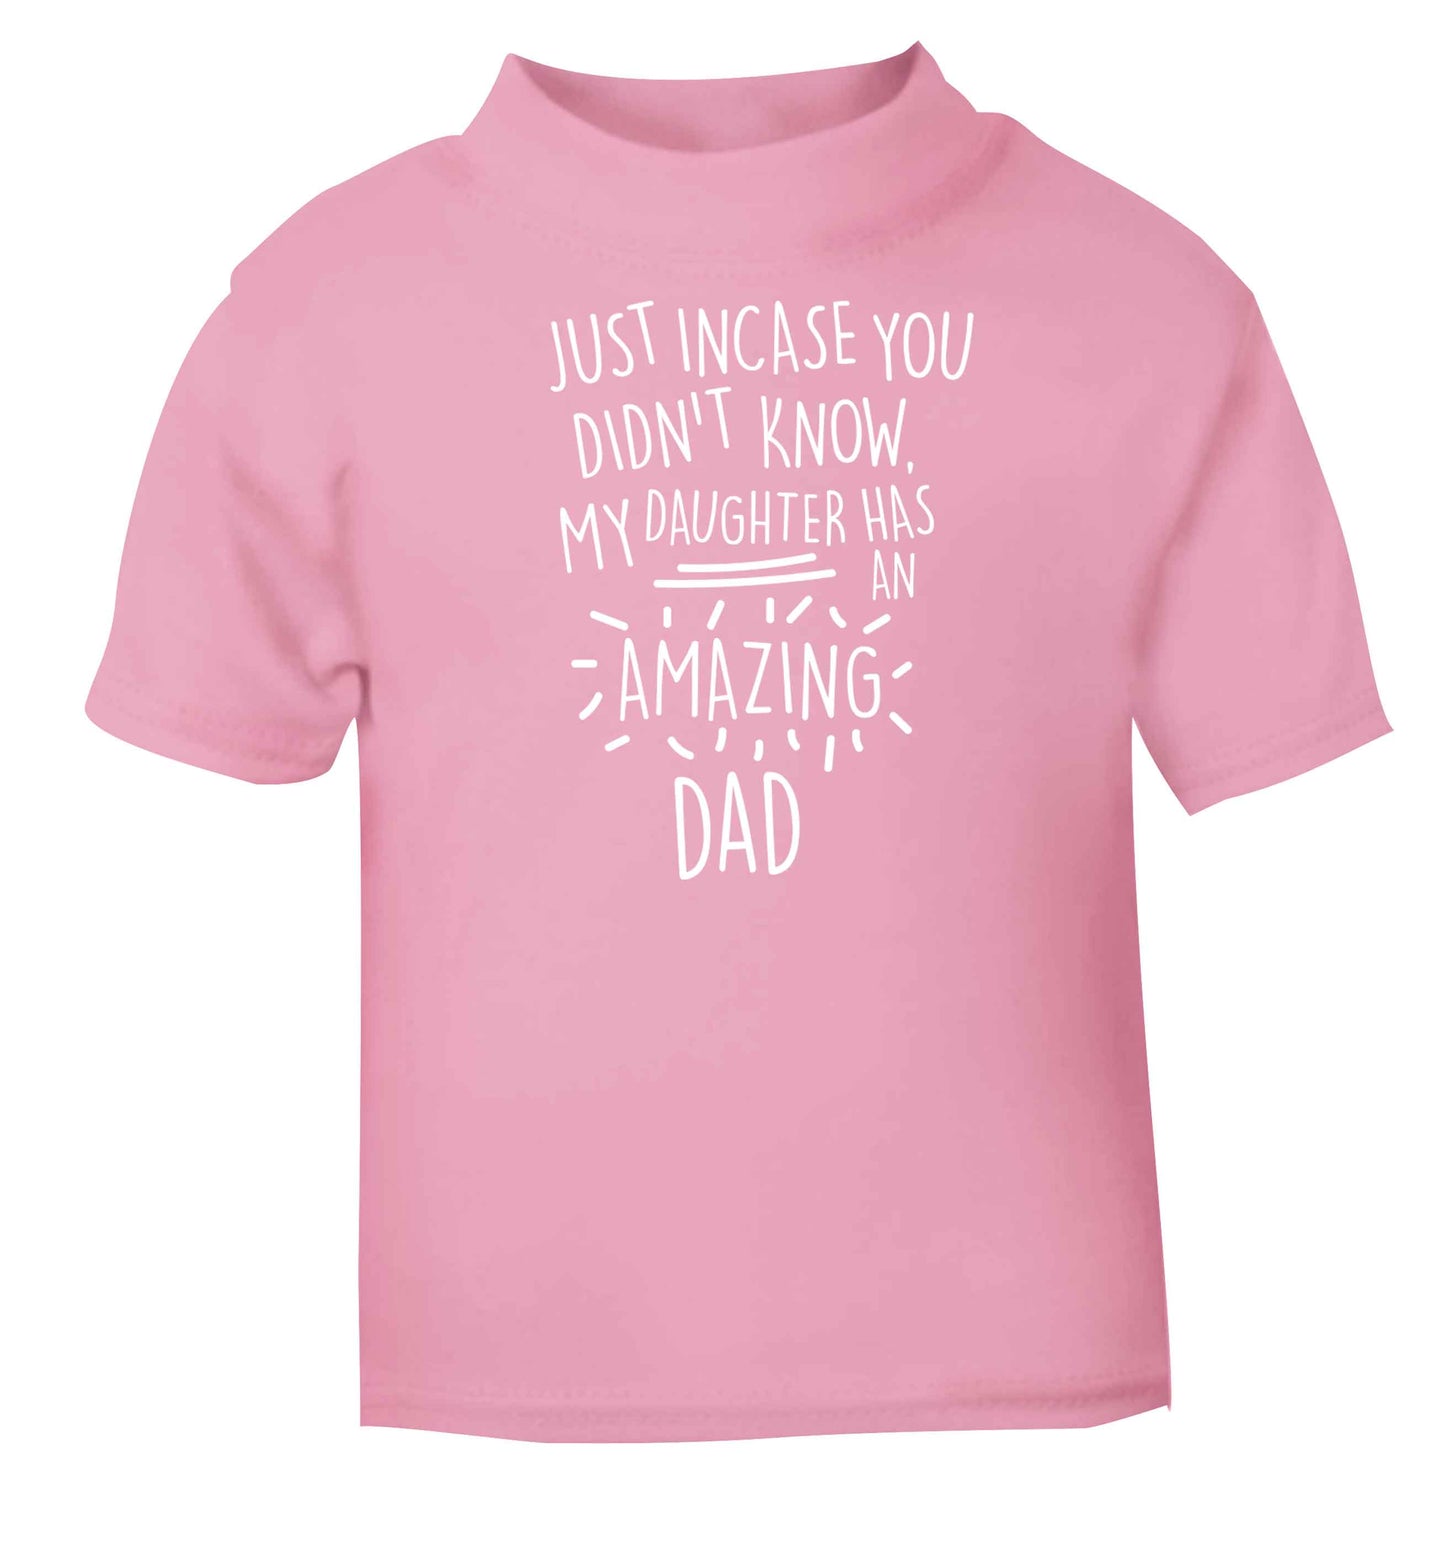 Just incase you didn't know my daughter has an amazing dad light pink baby toddler Tshirt 2 Years